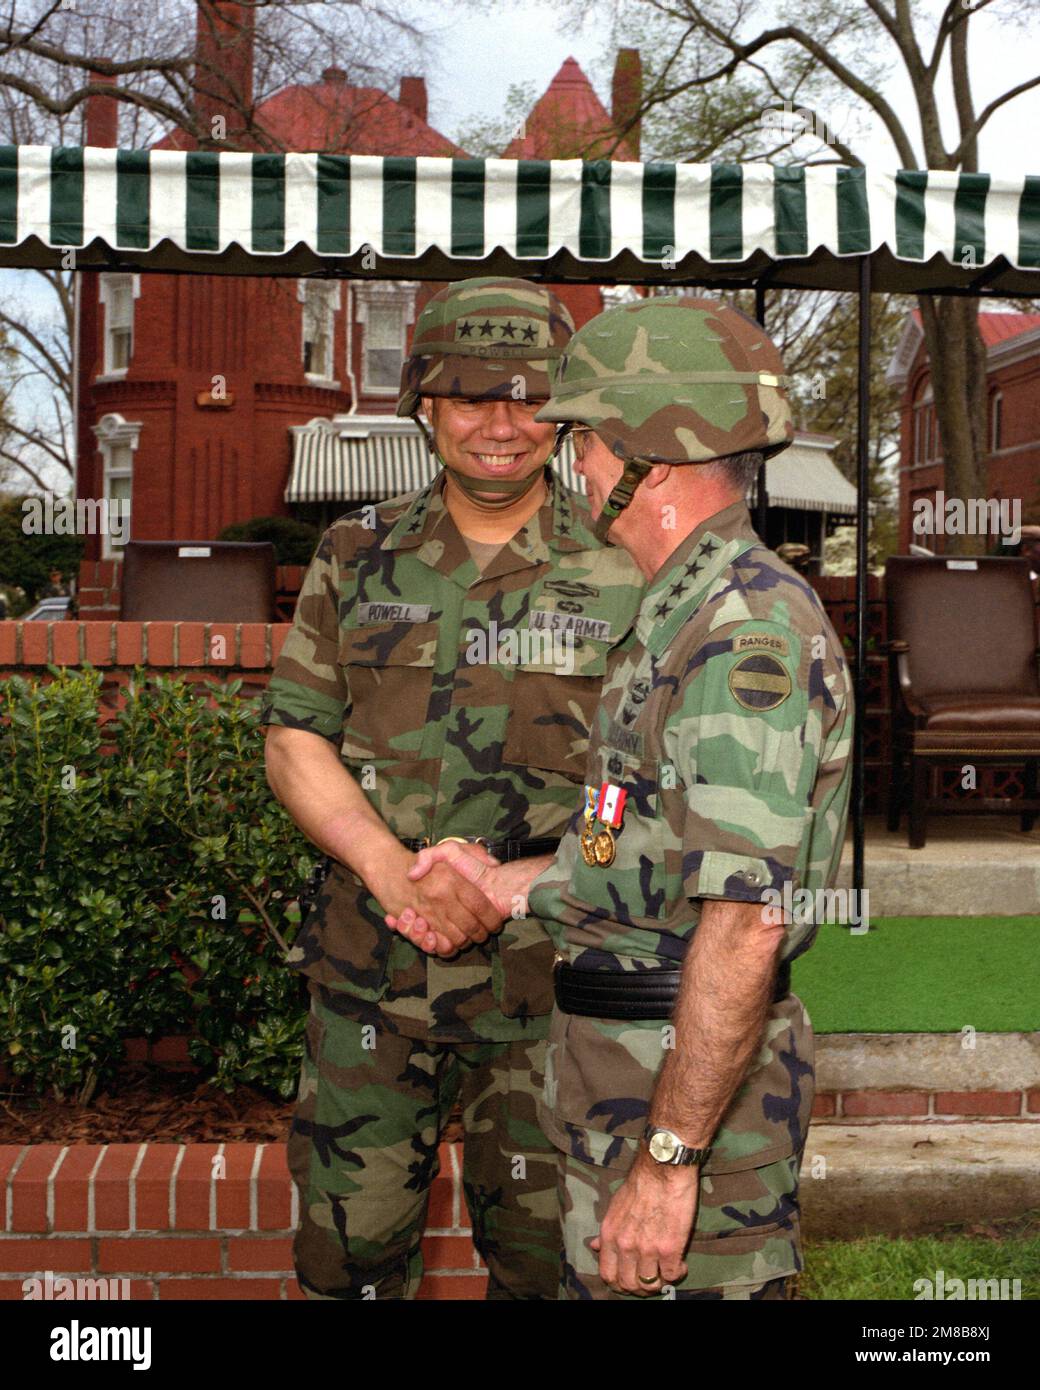 GEN. Colin L. Powell shakes hands with GEN. Joseph T. Palastra after Forces Command (FORSCOM) change of command in which GEN. Powell took command from GEN. Palastra. Base: Fort Mcpherson State: Georgia (GA) Country: United States Of America (USA) Stock Photo